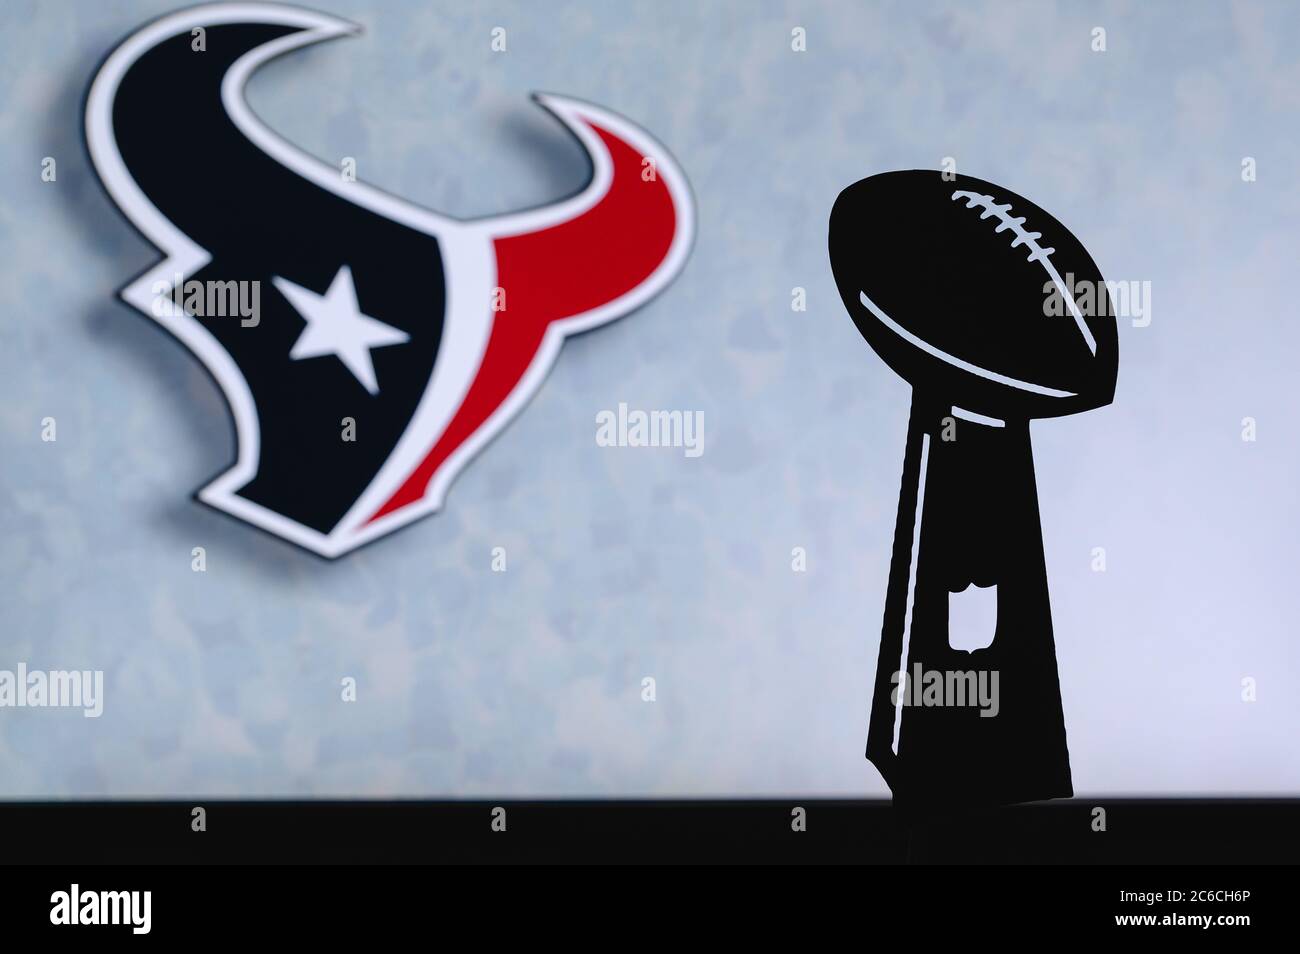 Houston Texans professional american football club, silhouette of NFL trophy, logo of the club in background. Stock Photo